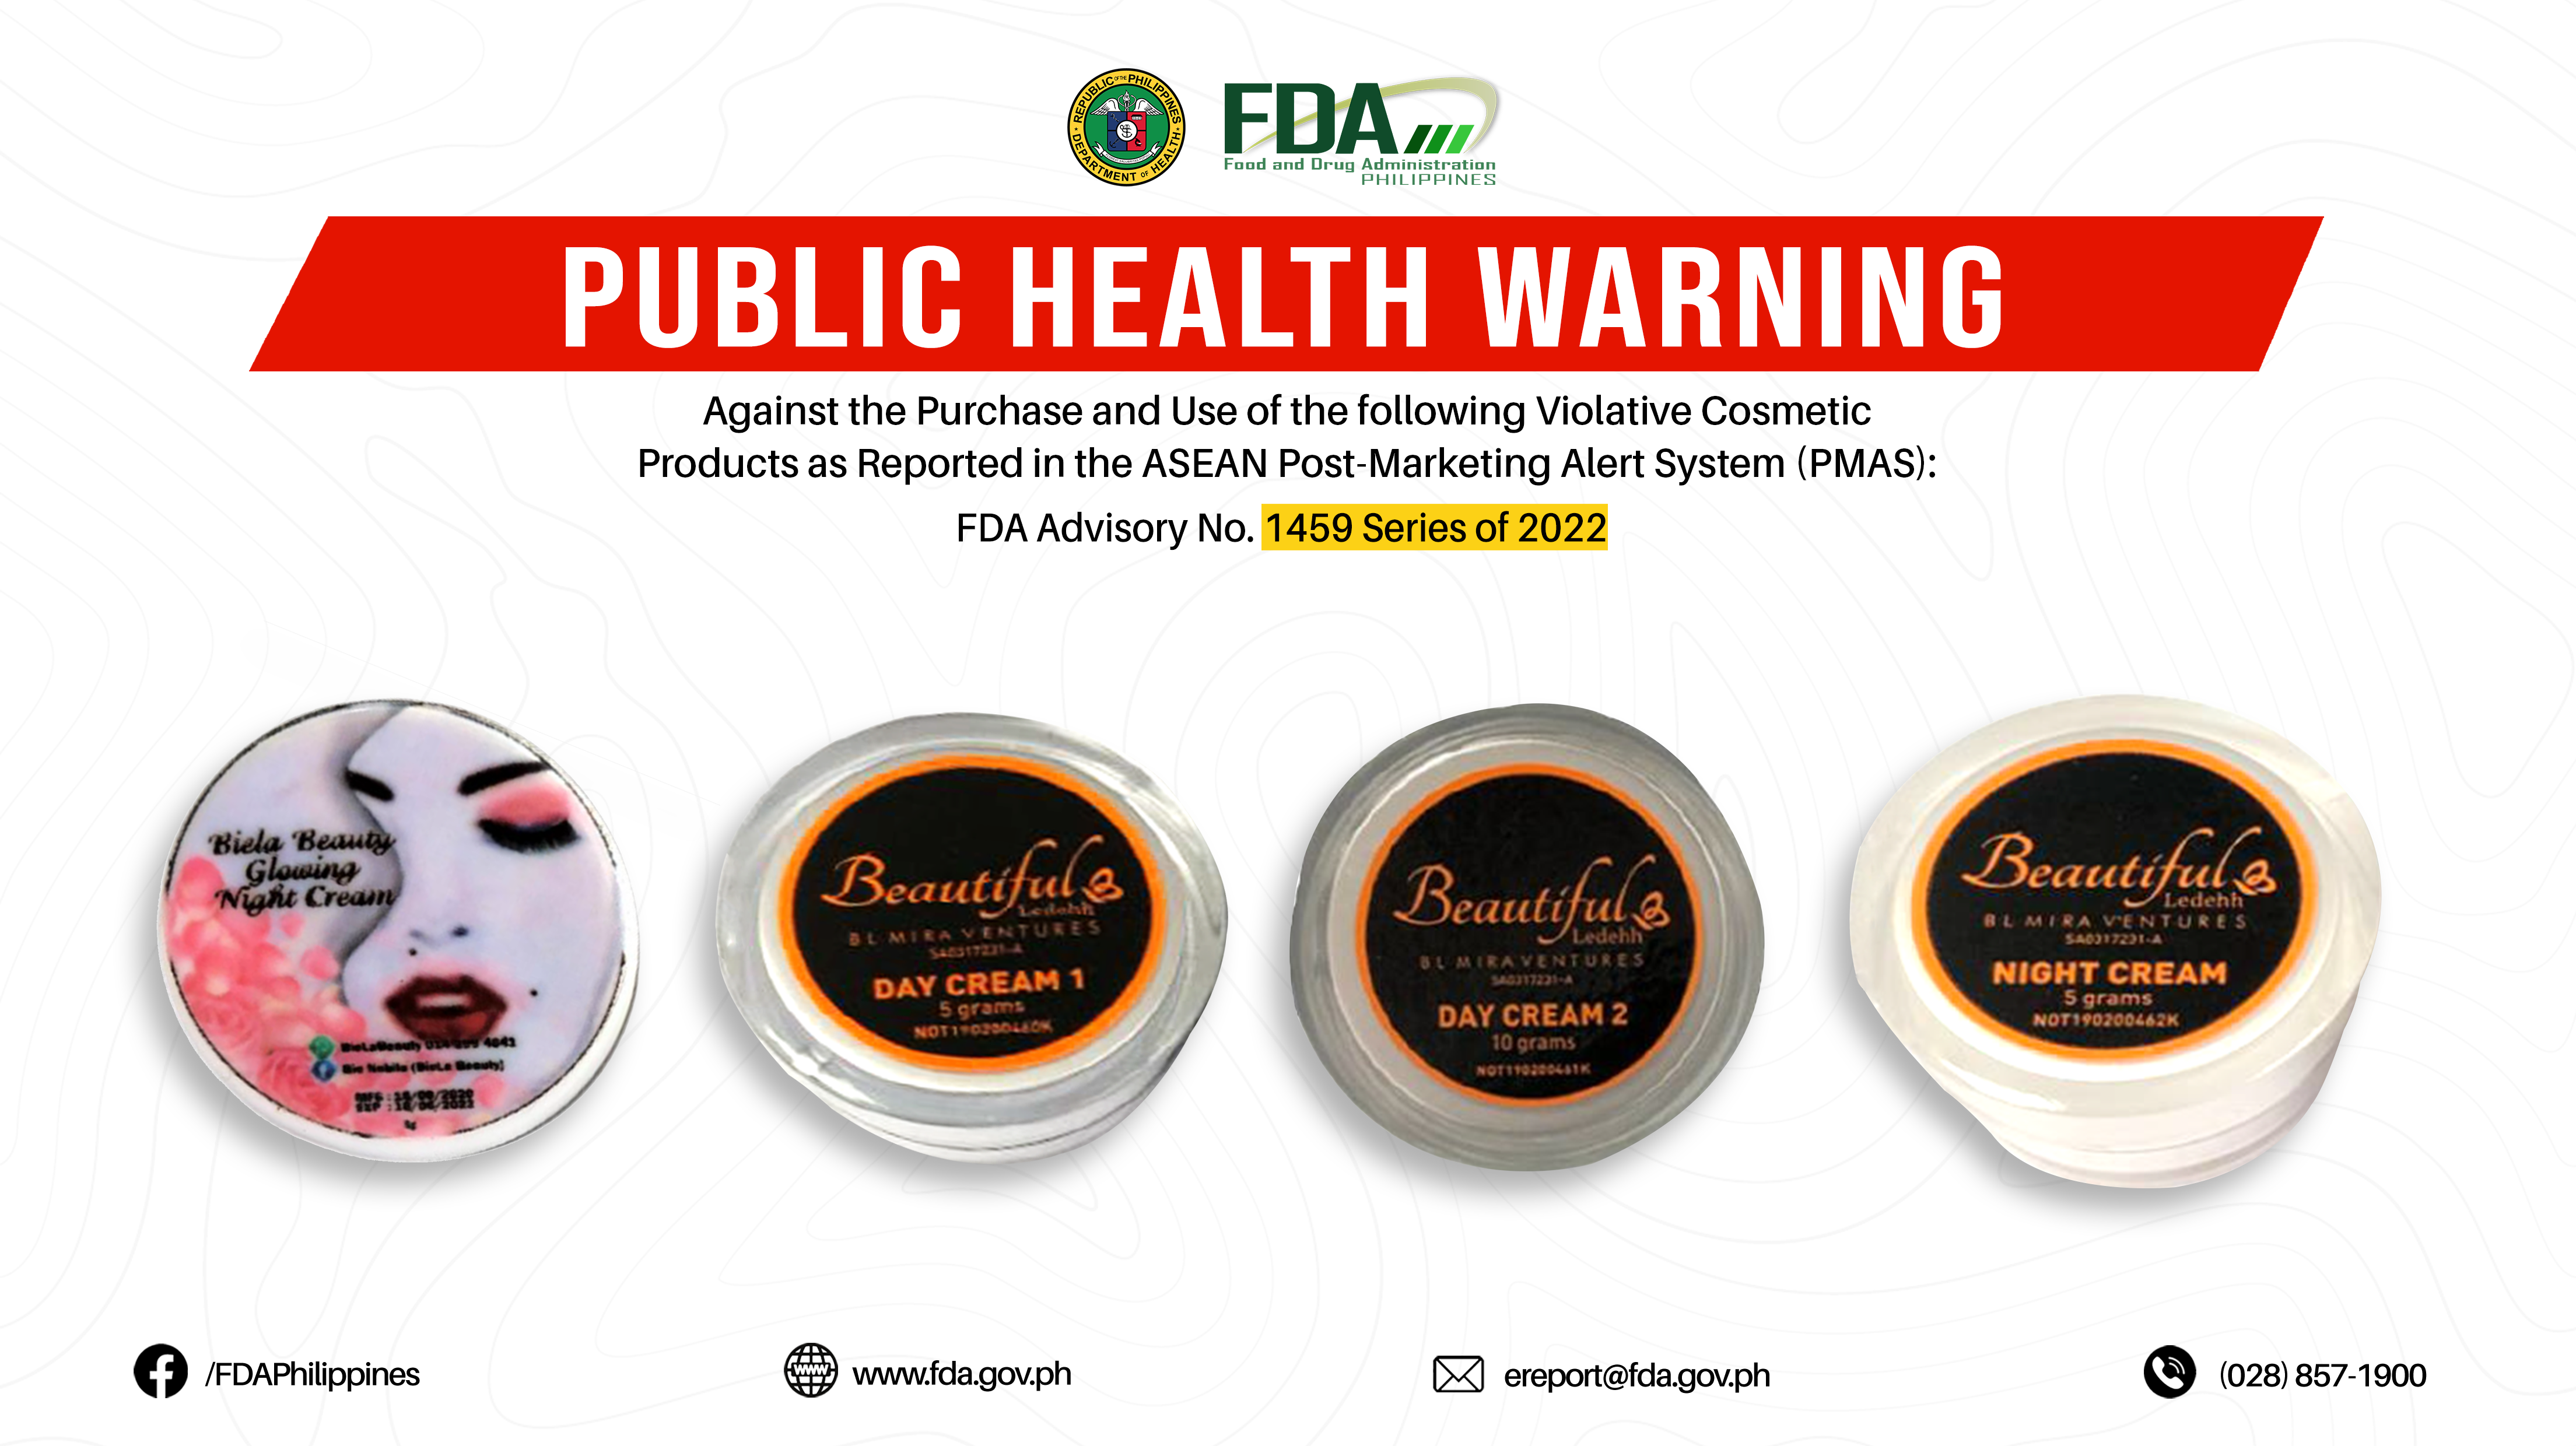 FDA Advisory No.2022-1459 || Public Health Warning Against the Purchase and Use of the following Violative Cosmetic Products as Reported in the ASEAN Post-Marketing Alert System (PMAS):